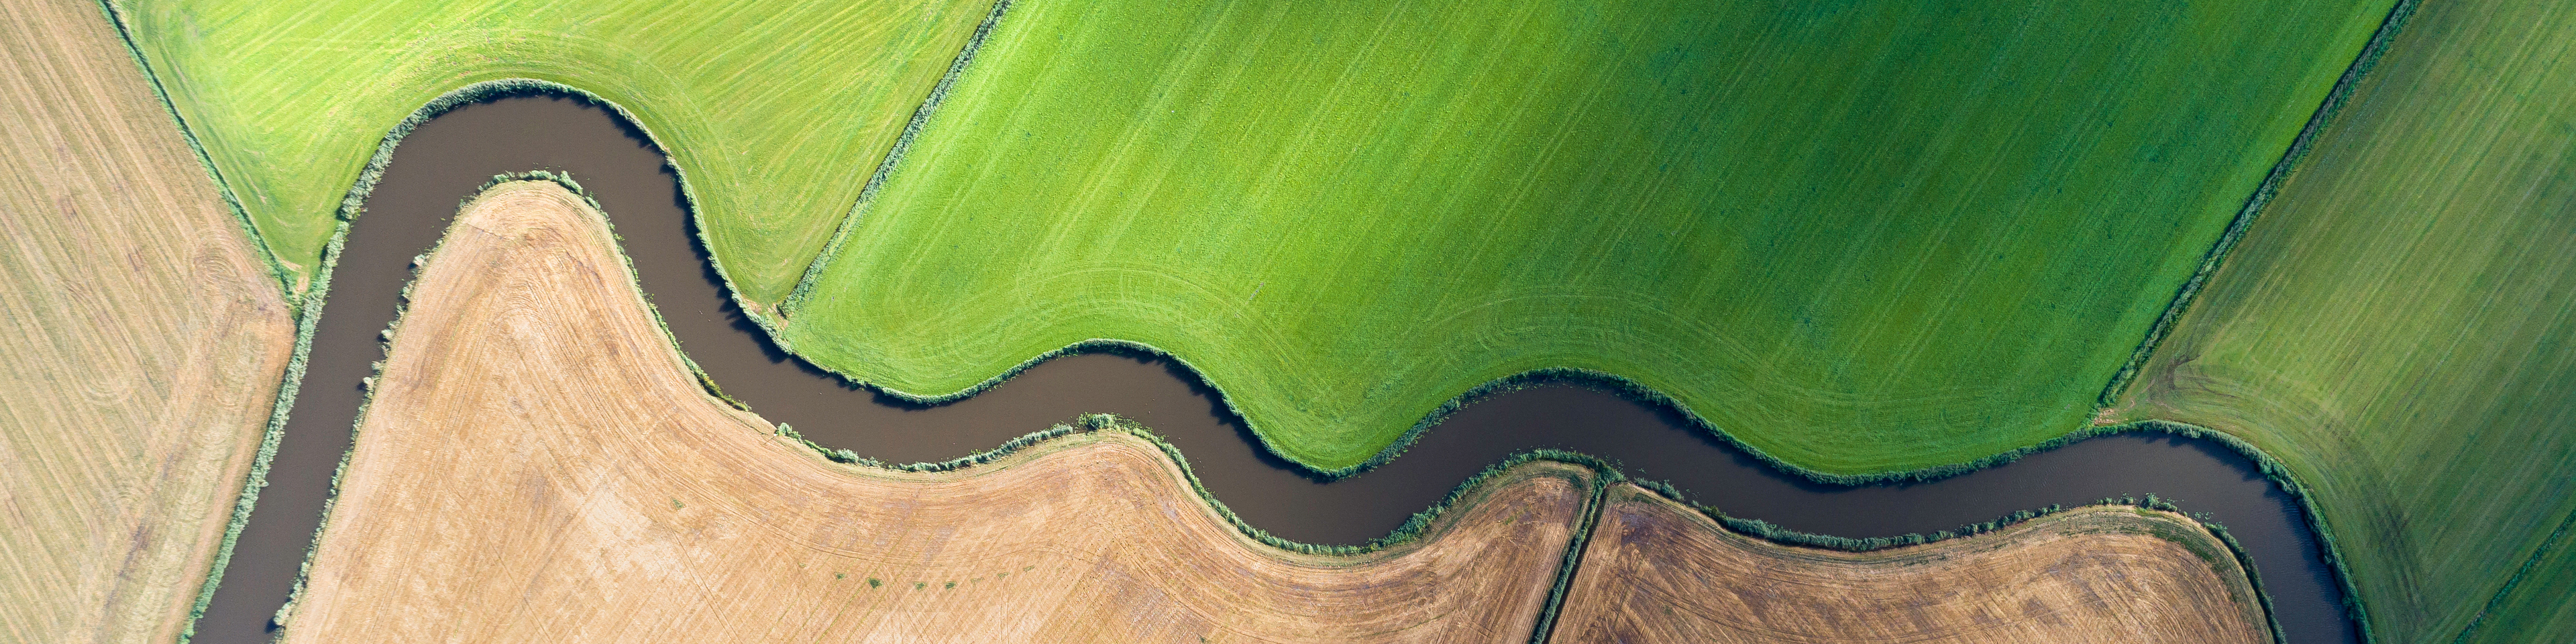 Aerial view of river bending through cultivated fields